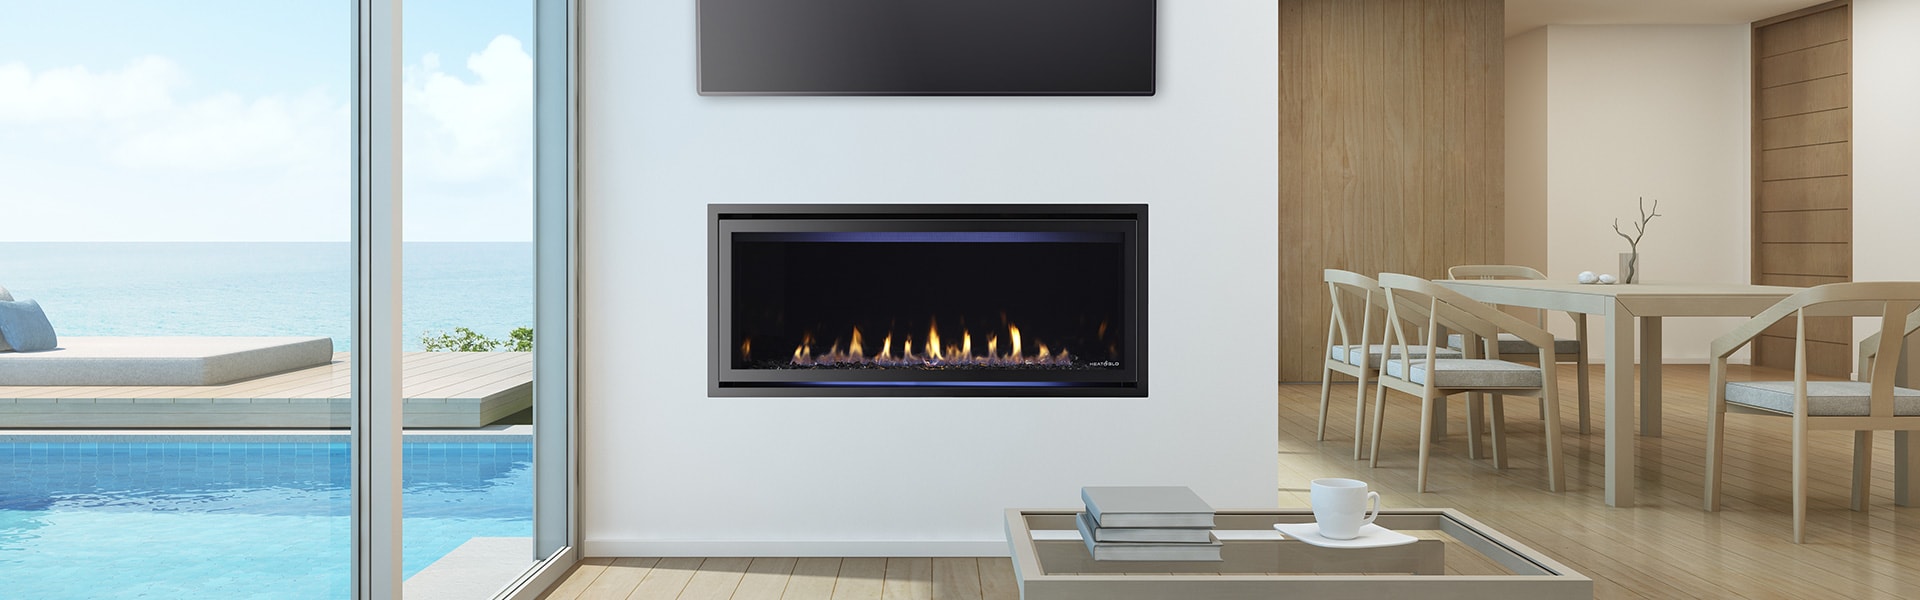 Glass Gas Fireplace Insert Elegant Cosmo 42 Gas Fireplace